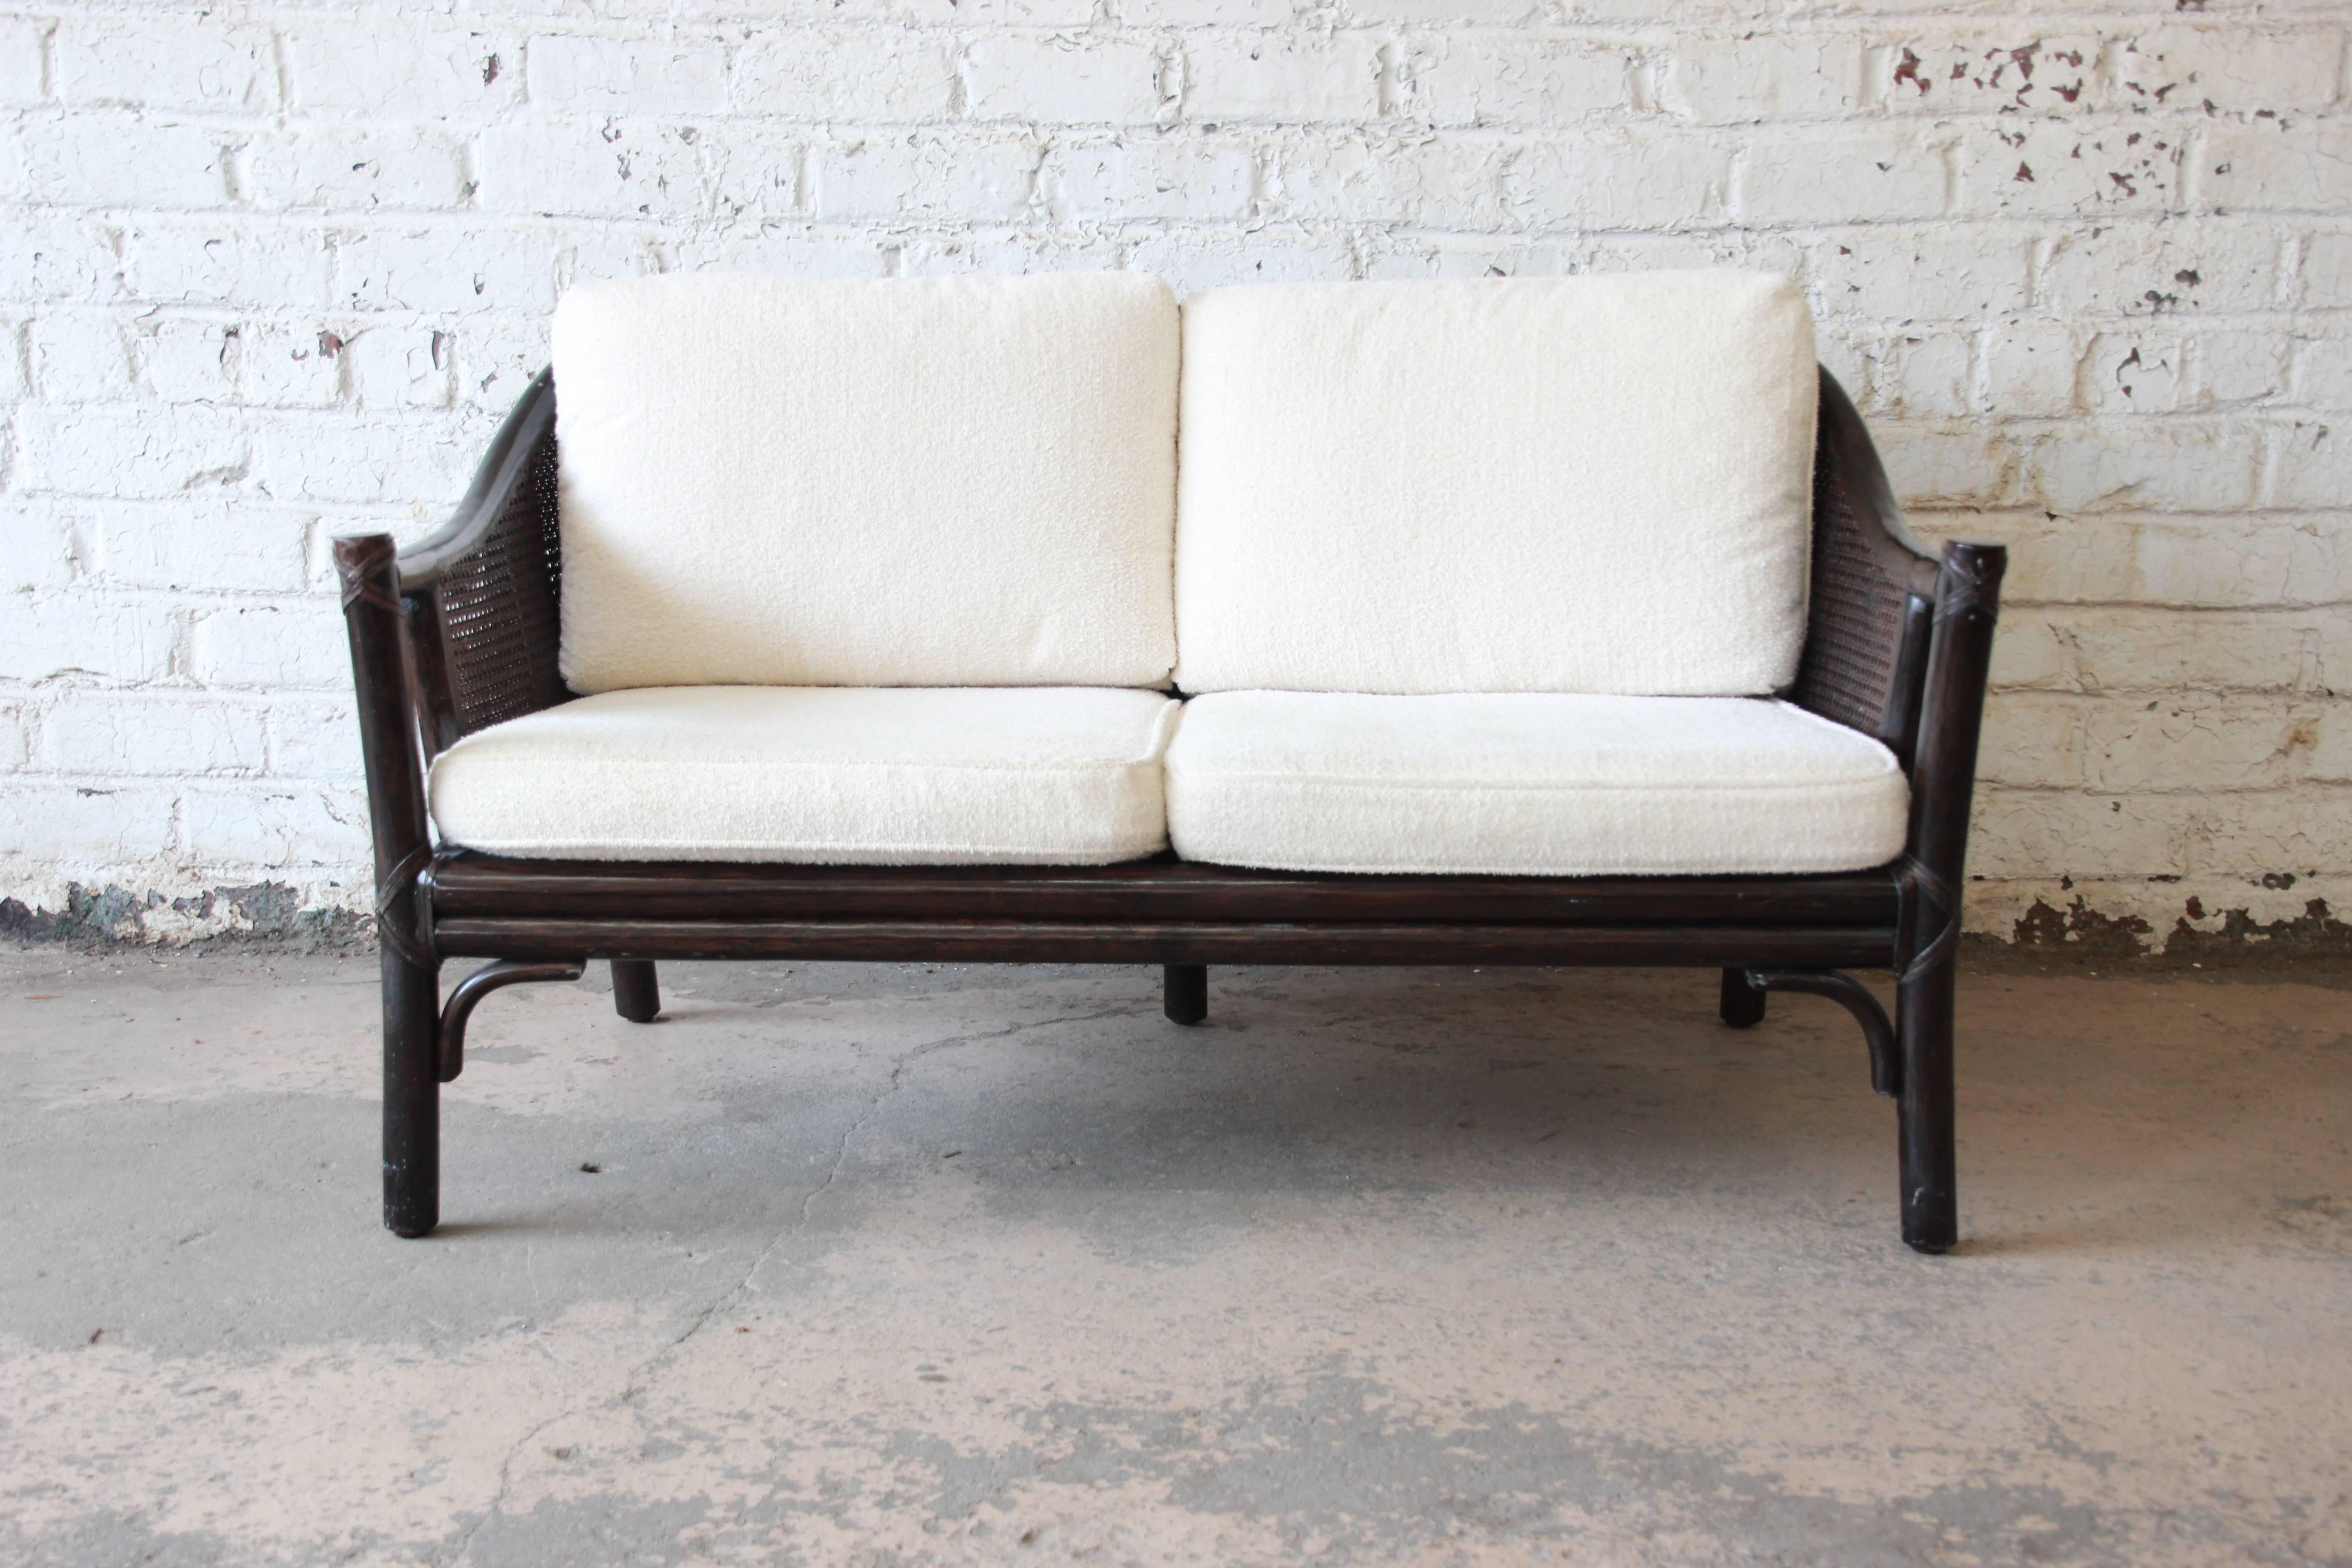 A gorgeous vintage rattan and cane settee or love seat by McGuire. It features expertly crafted hardwood and rattan construction, with a nice patina from age. Caning is all intact, and the ivory upholstery is clean and ready for use. Retains the